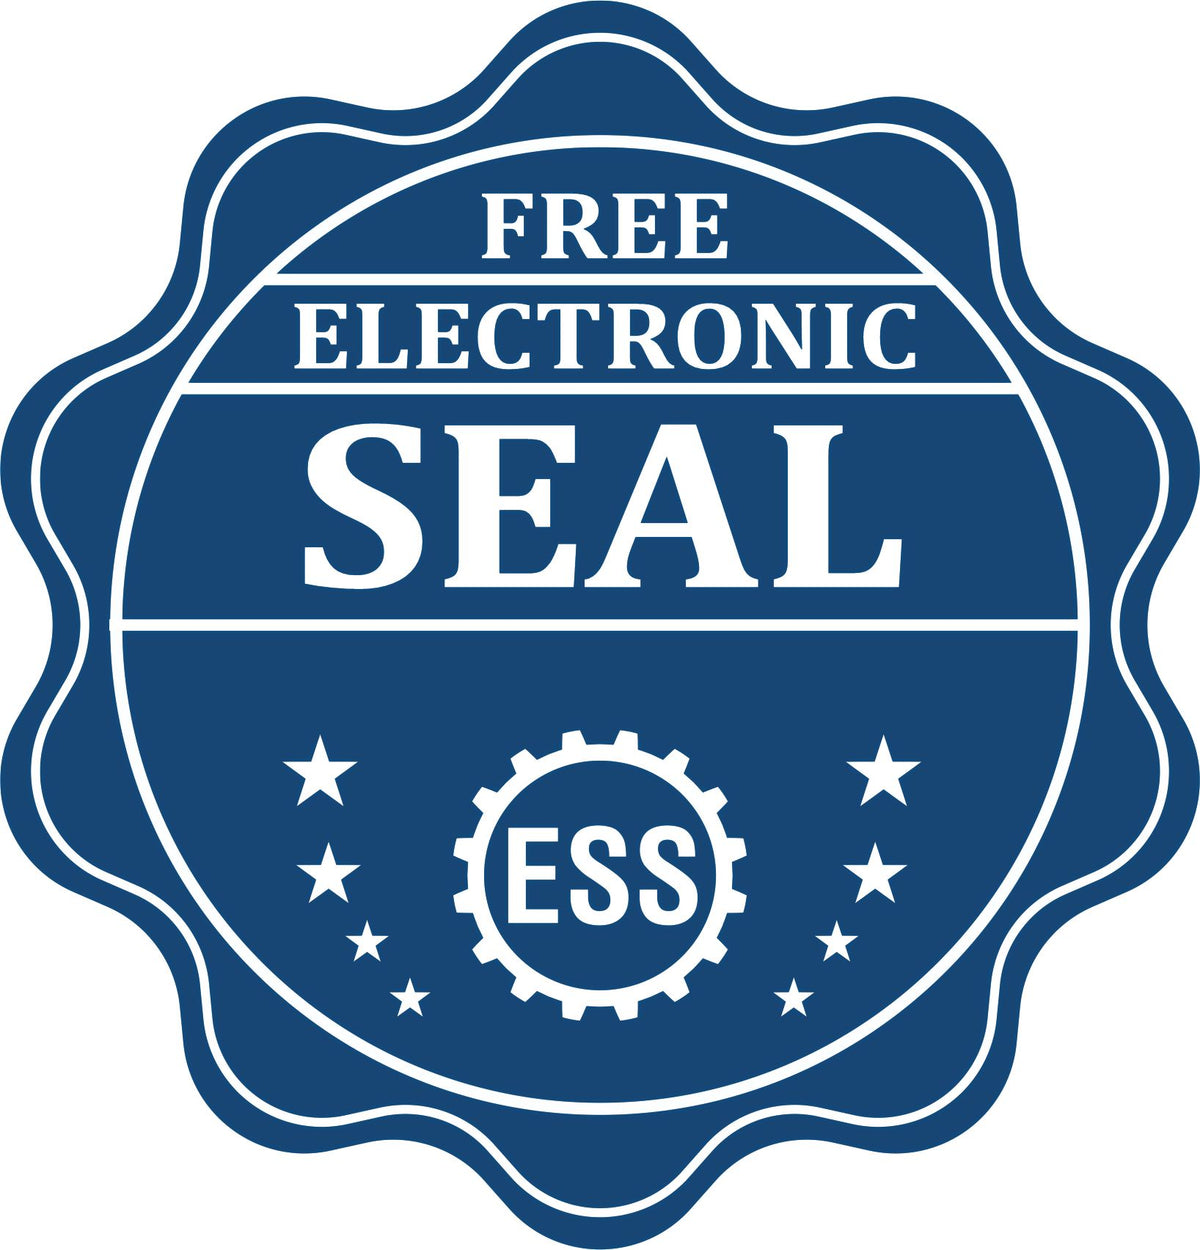 A badge showing a free electronic seal for the Gift Illinois Architect Seal with stars and the ESS gear on the emblem.